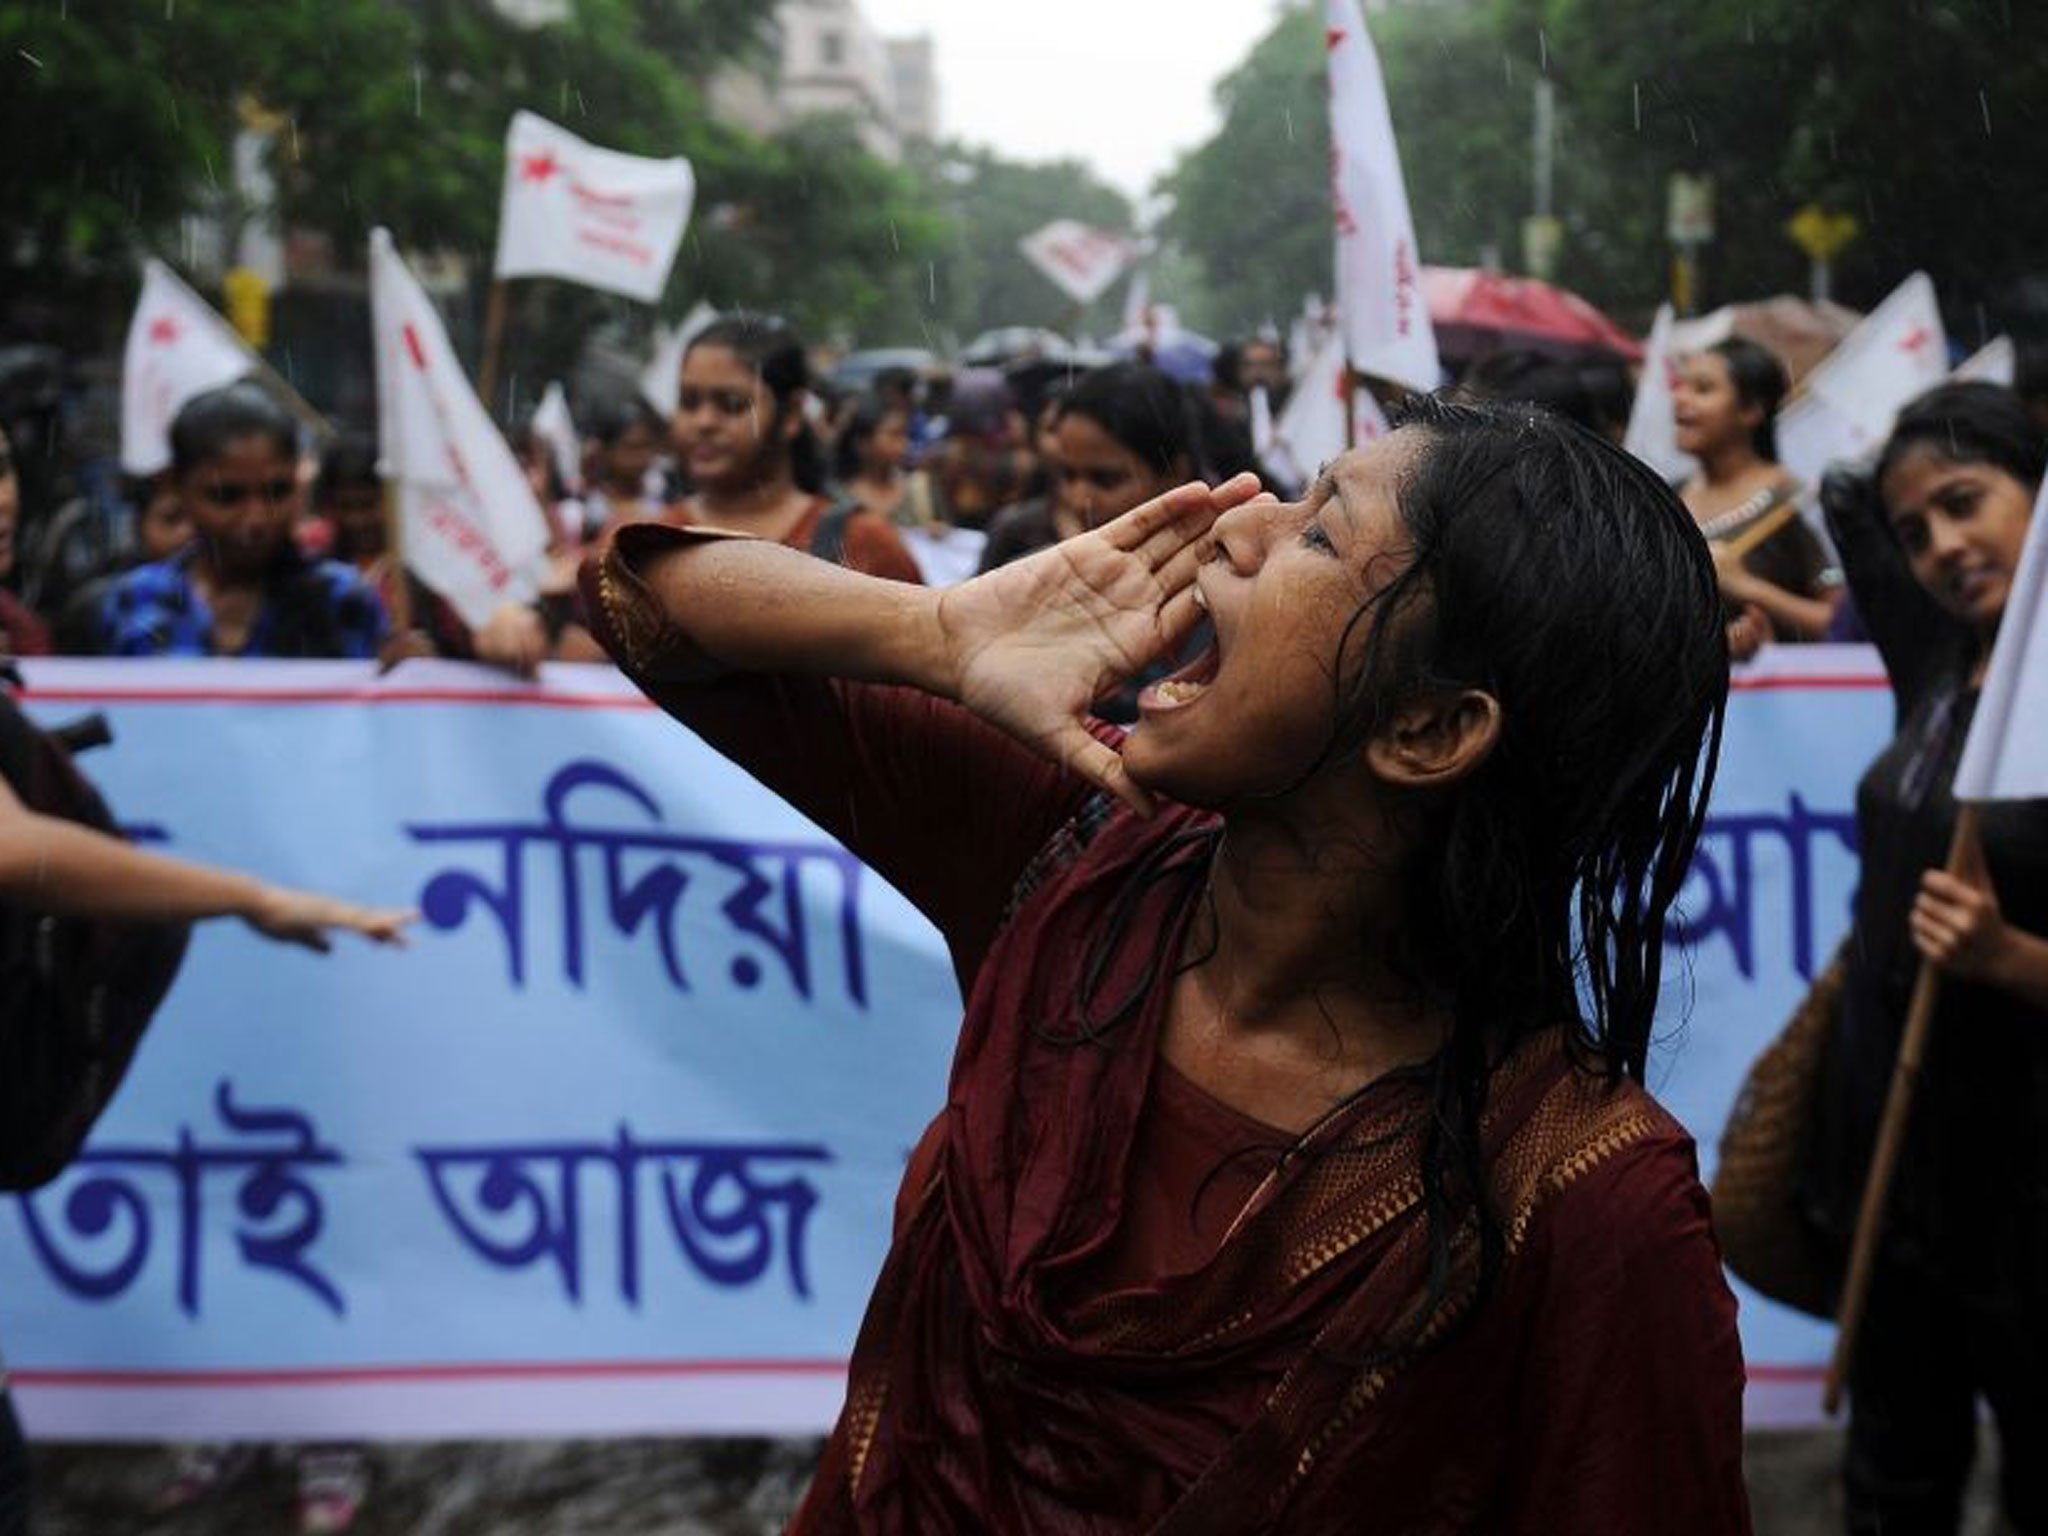 Students supporting various Leftist parties shout anti-government slogans during a protest following the recent gangrape and murder of a 20-year-old college student in Barasat, in Kolkata